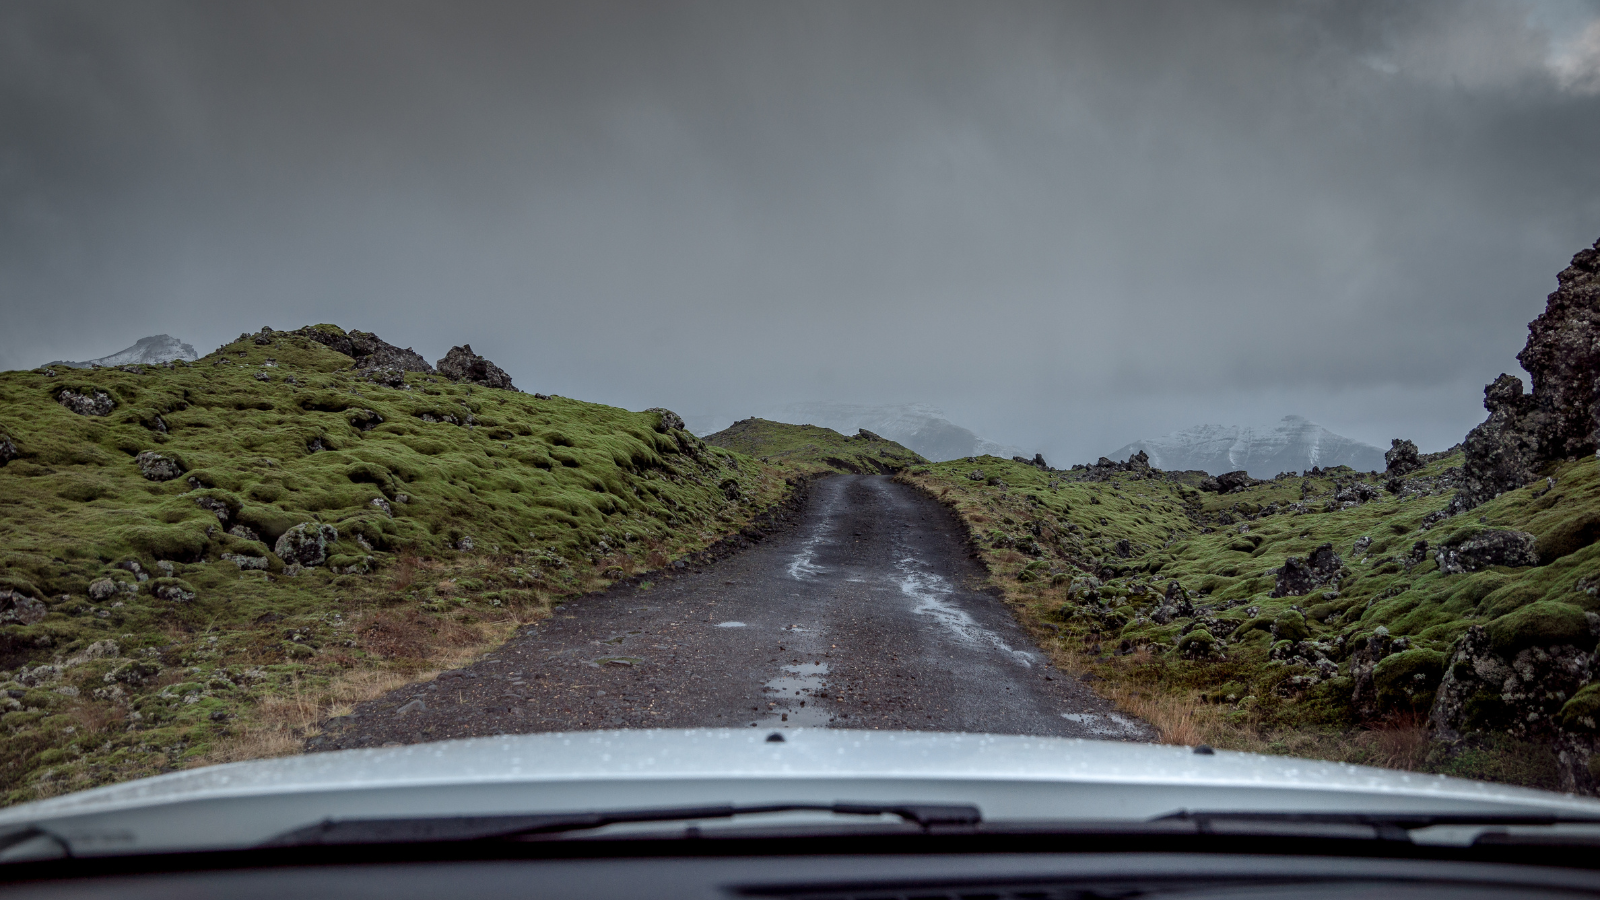 Gravel road to nowhere in Iceland